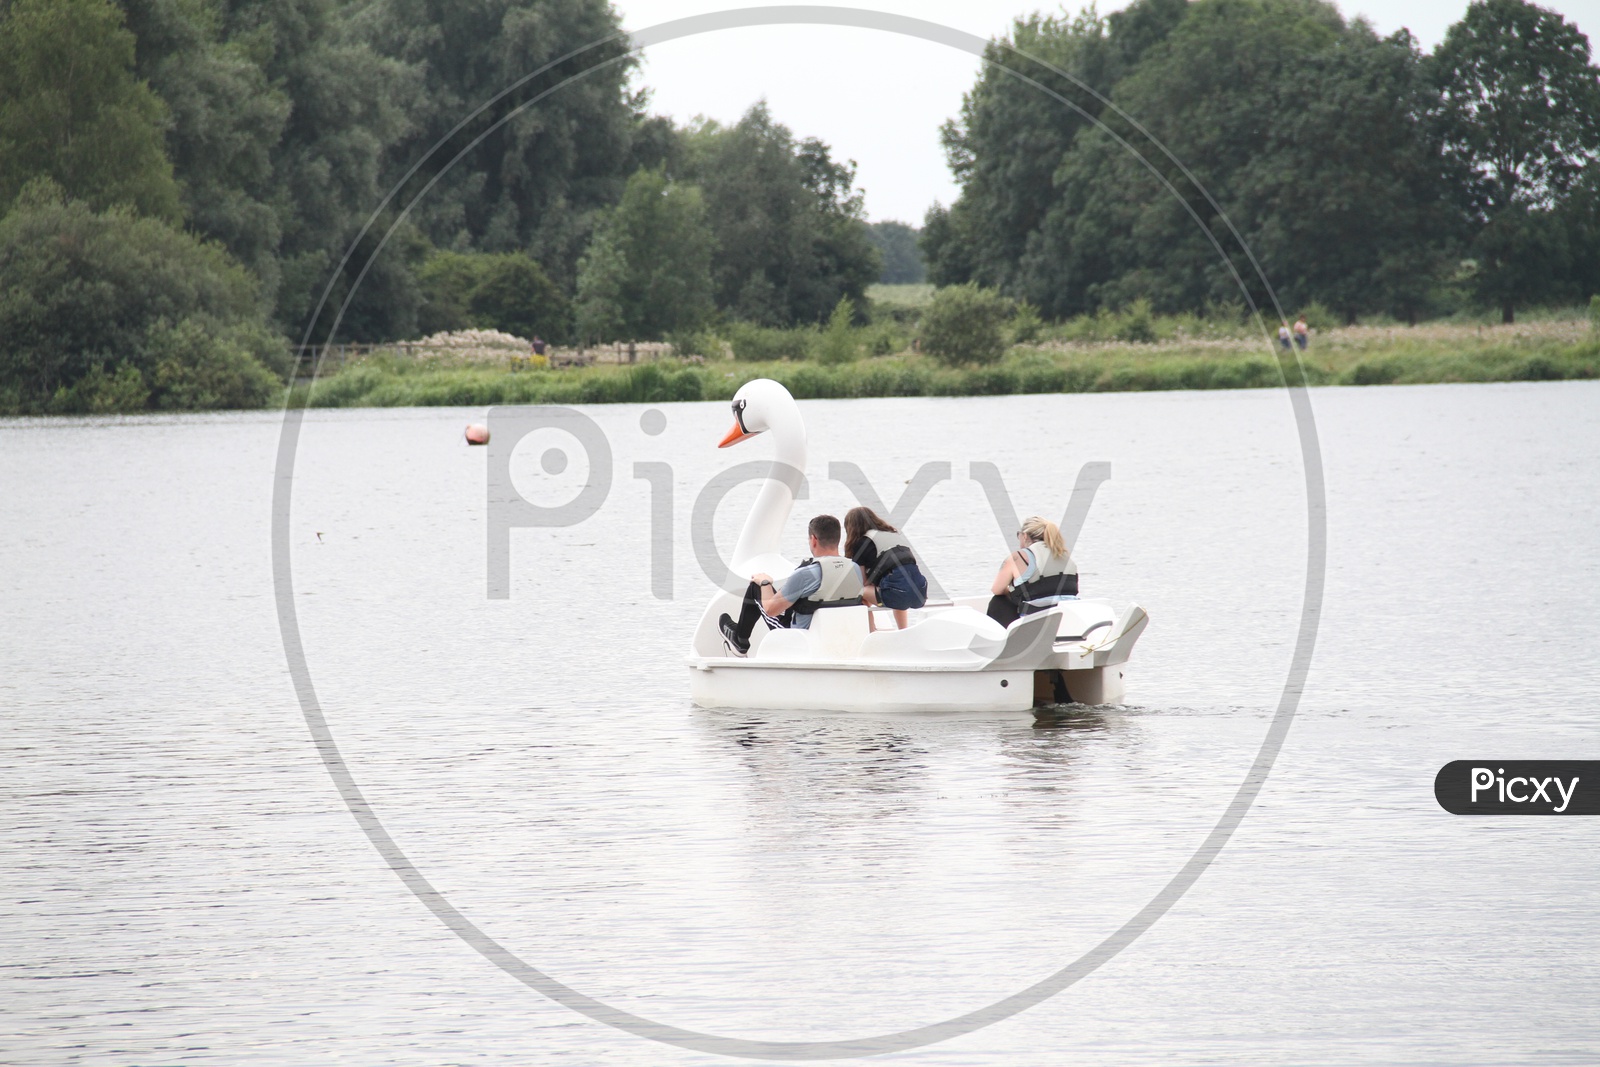 Boating in a Lake at Ferry Meadows Caravan and Motorhome Club Site